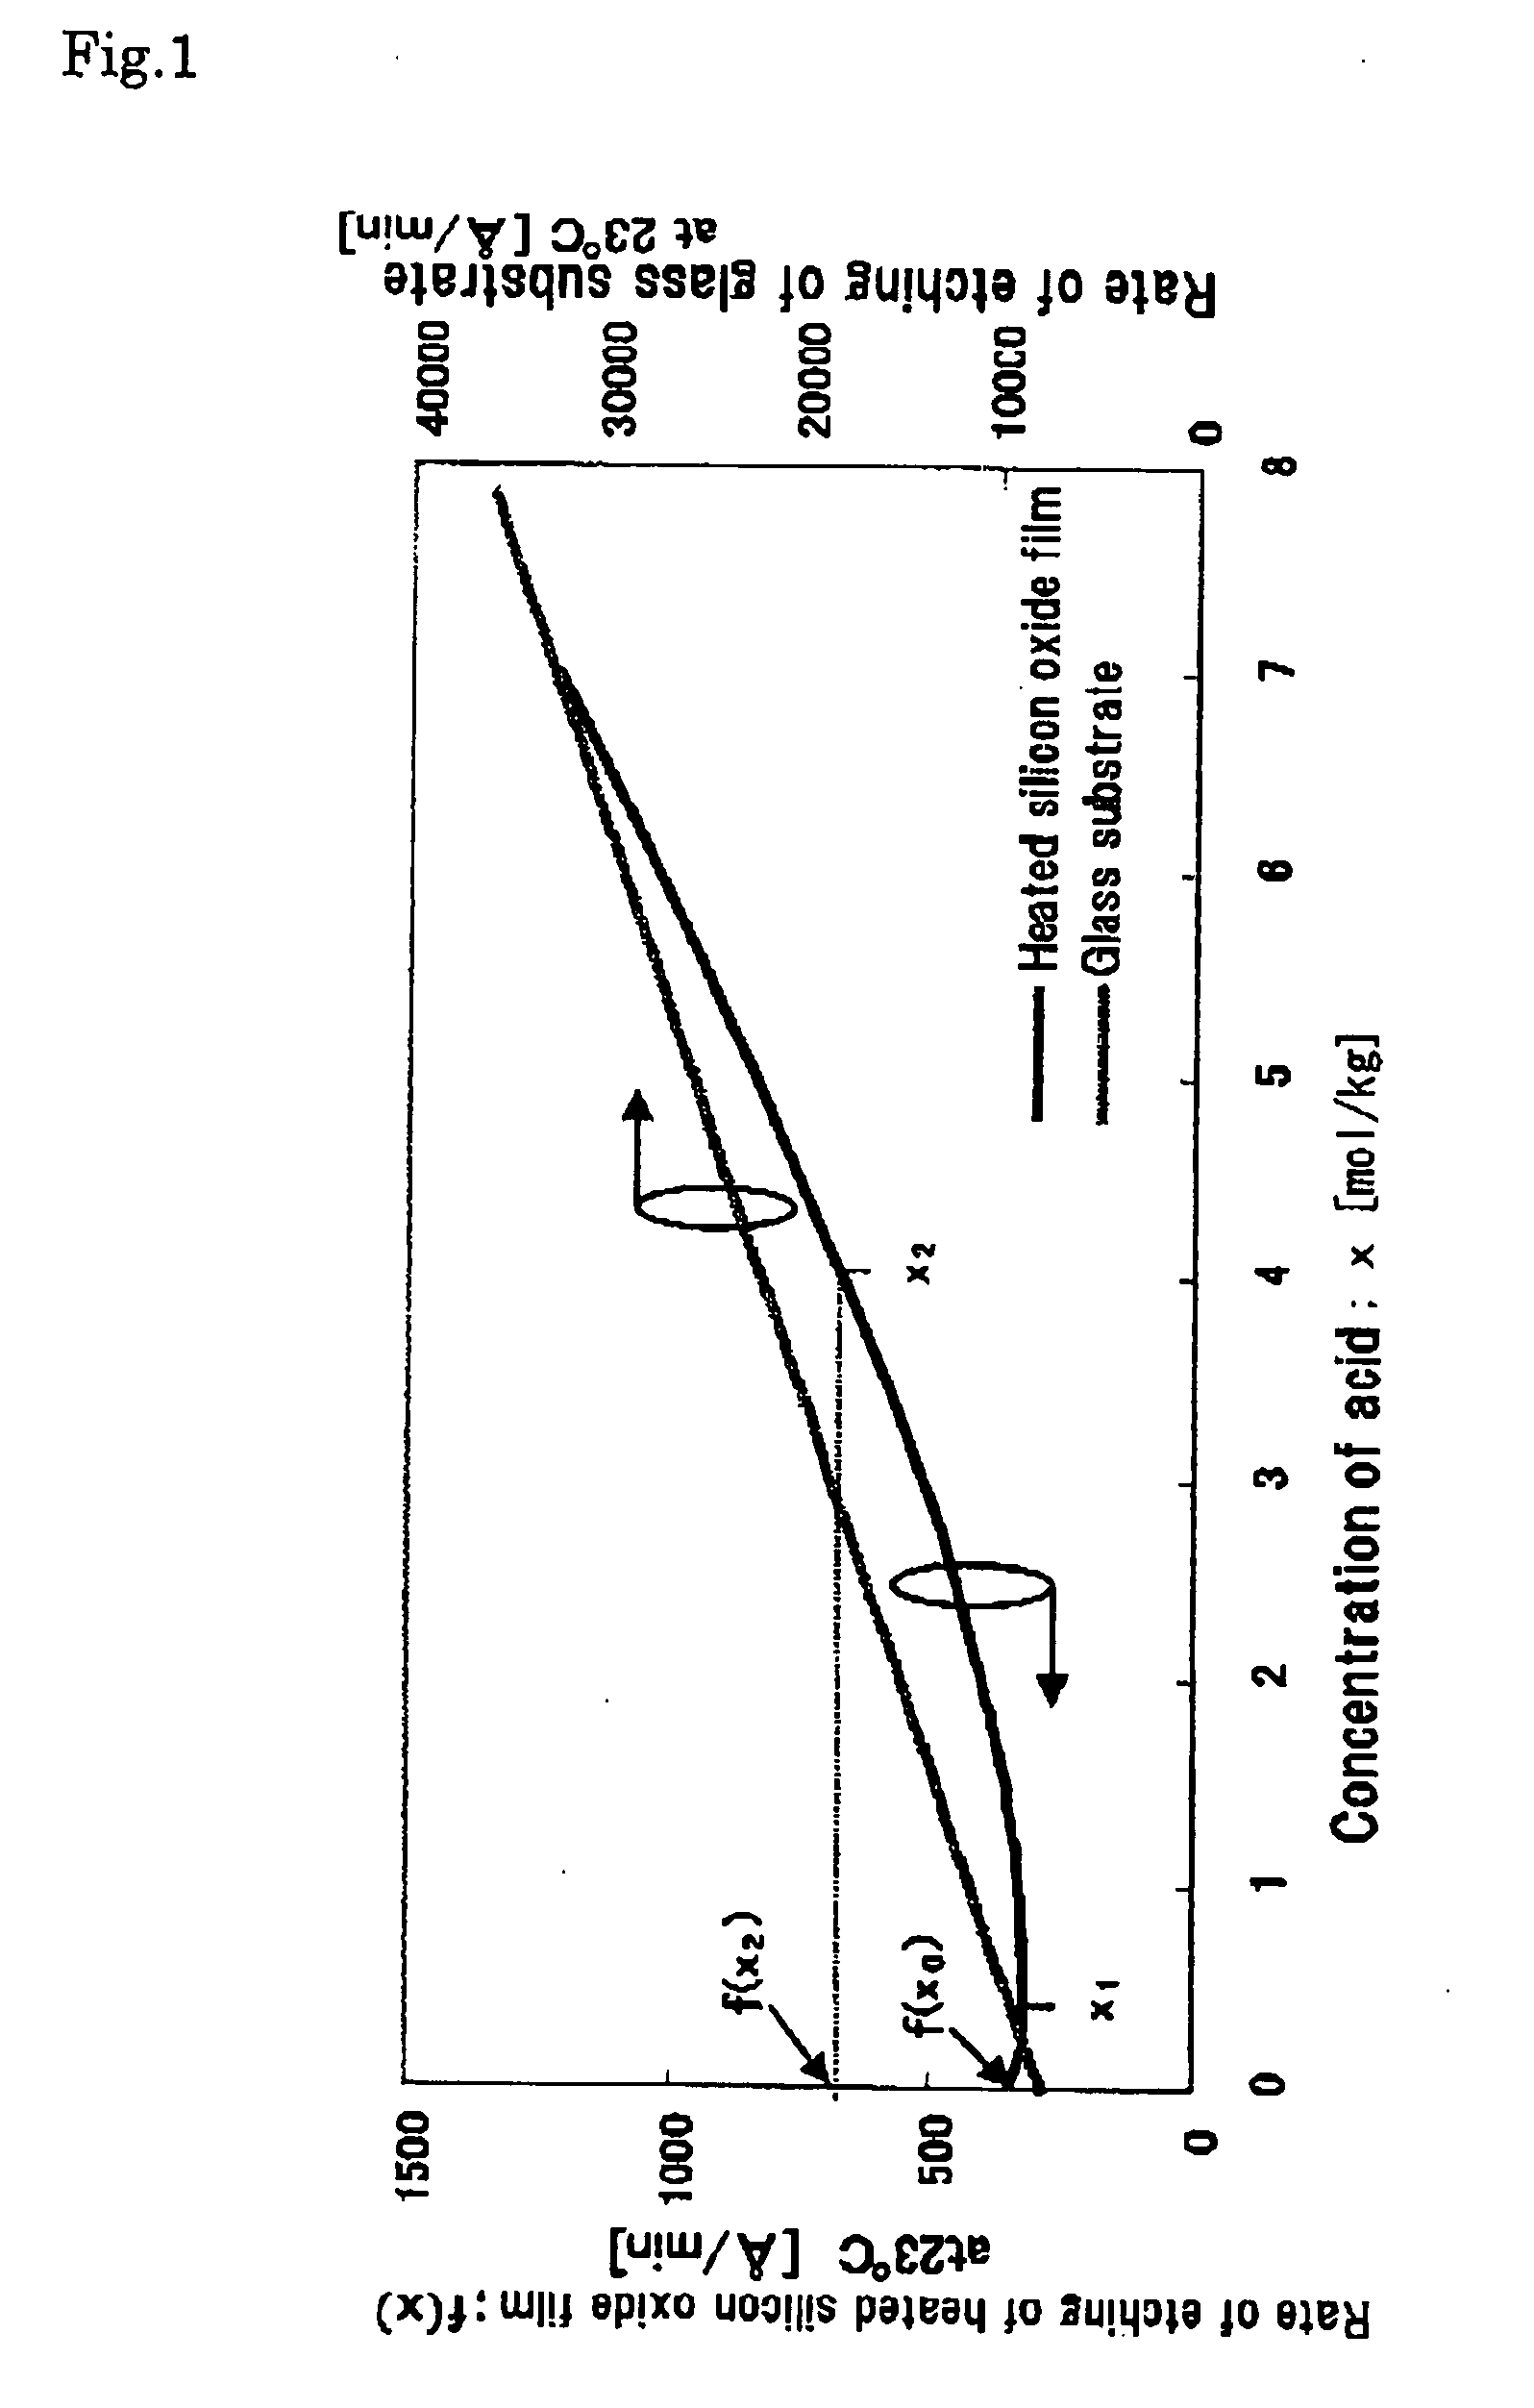 Surface treating fluid for fine processing of multi-component glass substrate